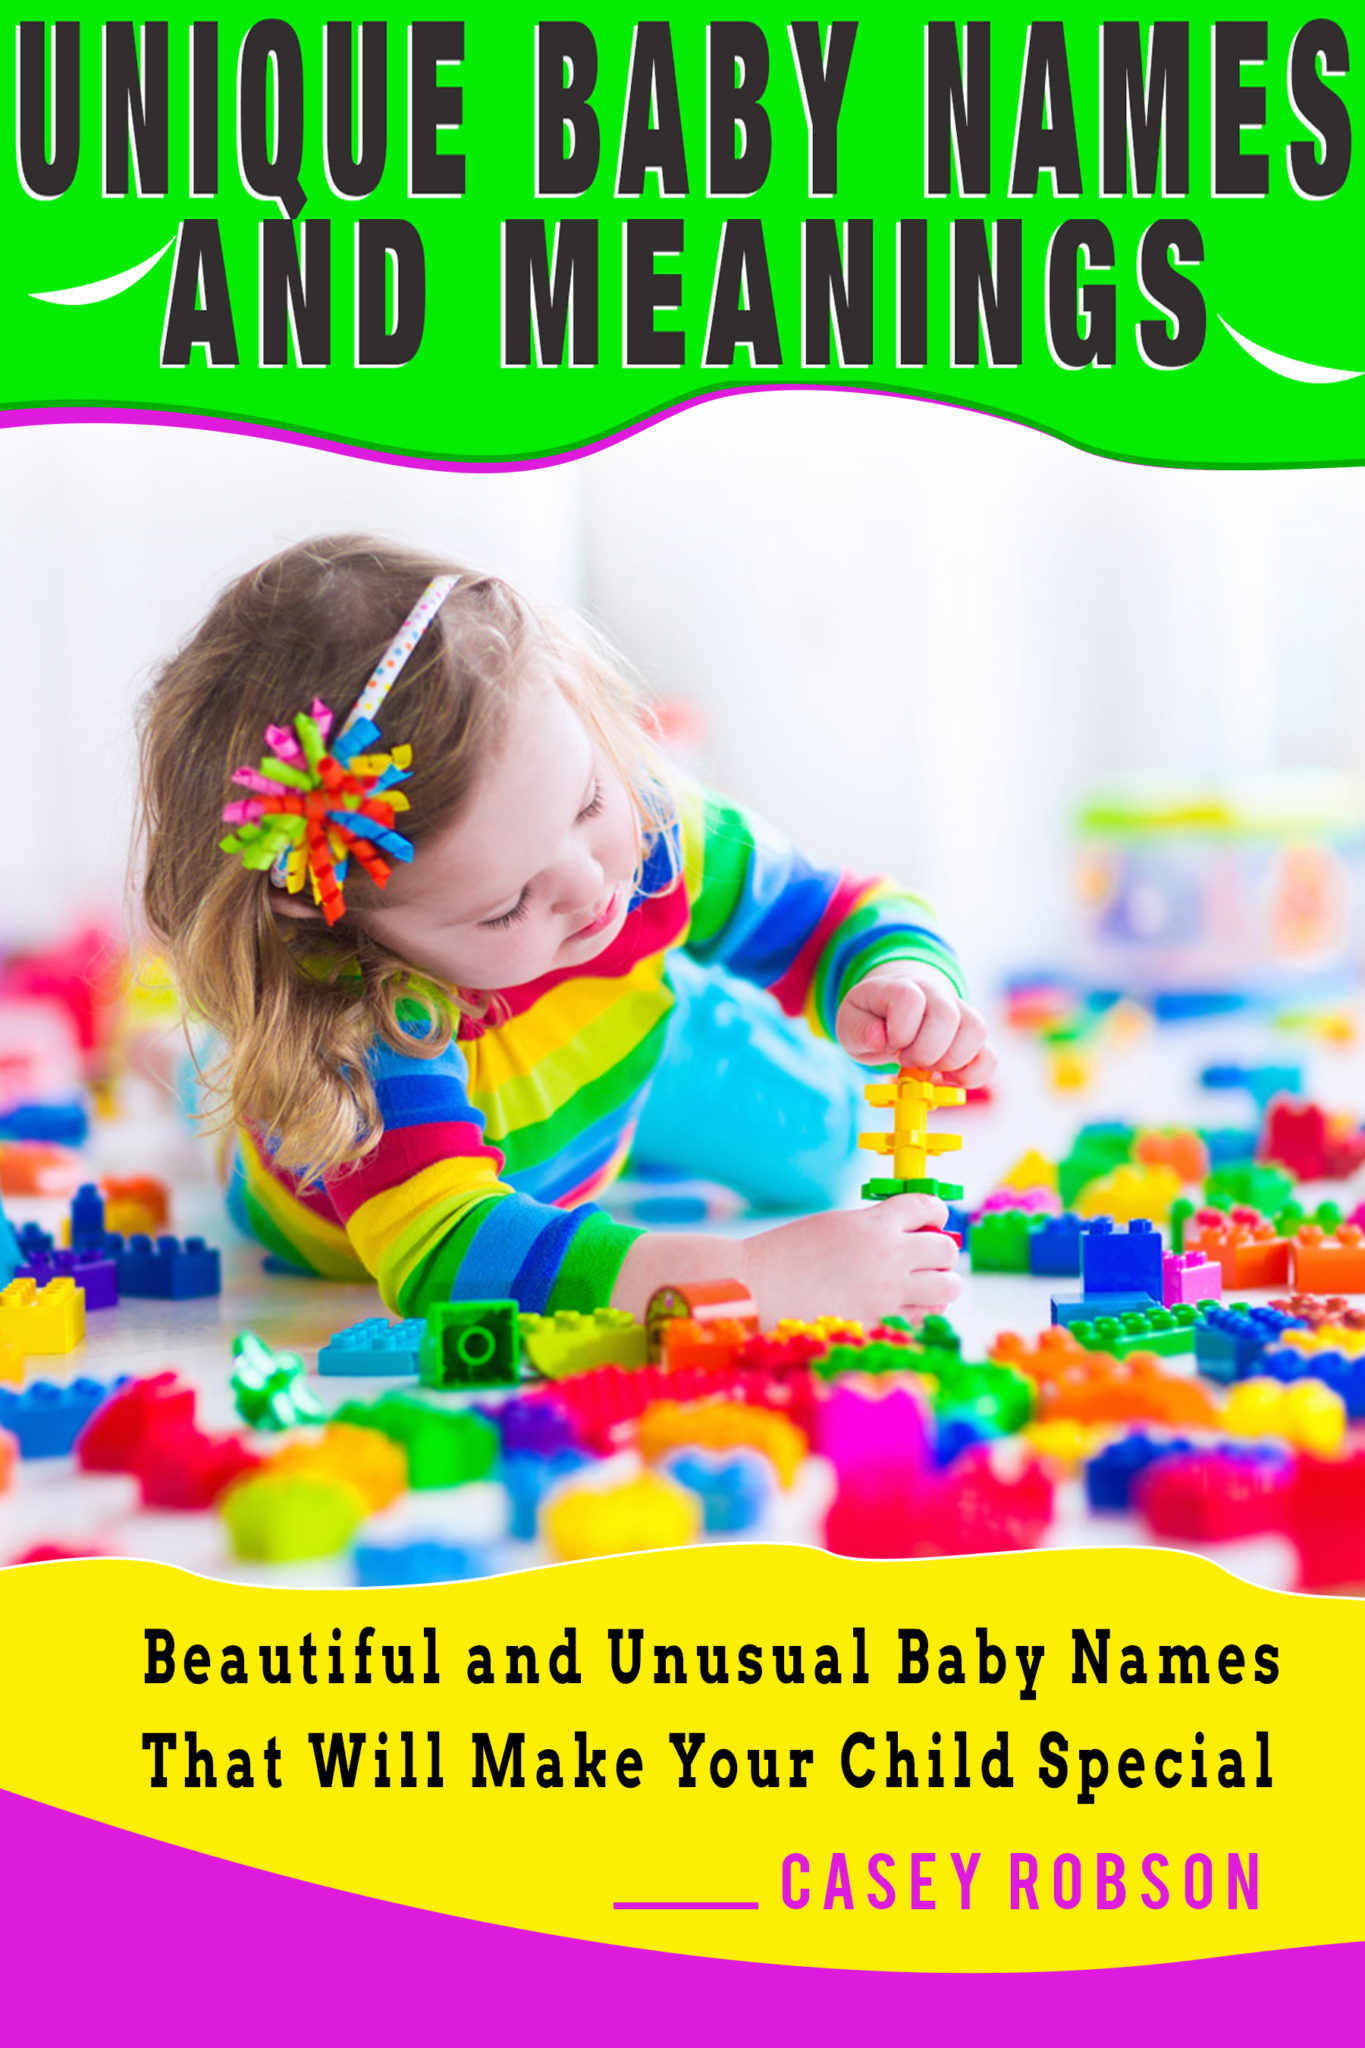 FREE: Unique Baby Names and Meanings: Beautiful and Unusual Baby Names That Will Make Your Child Special by Casey Robson